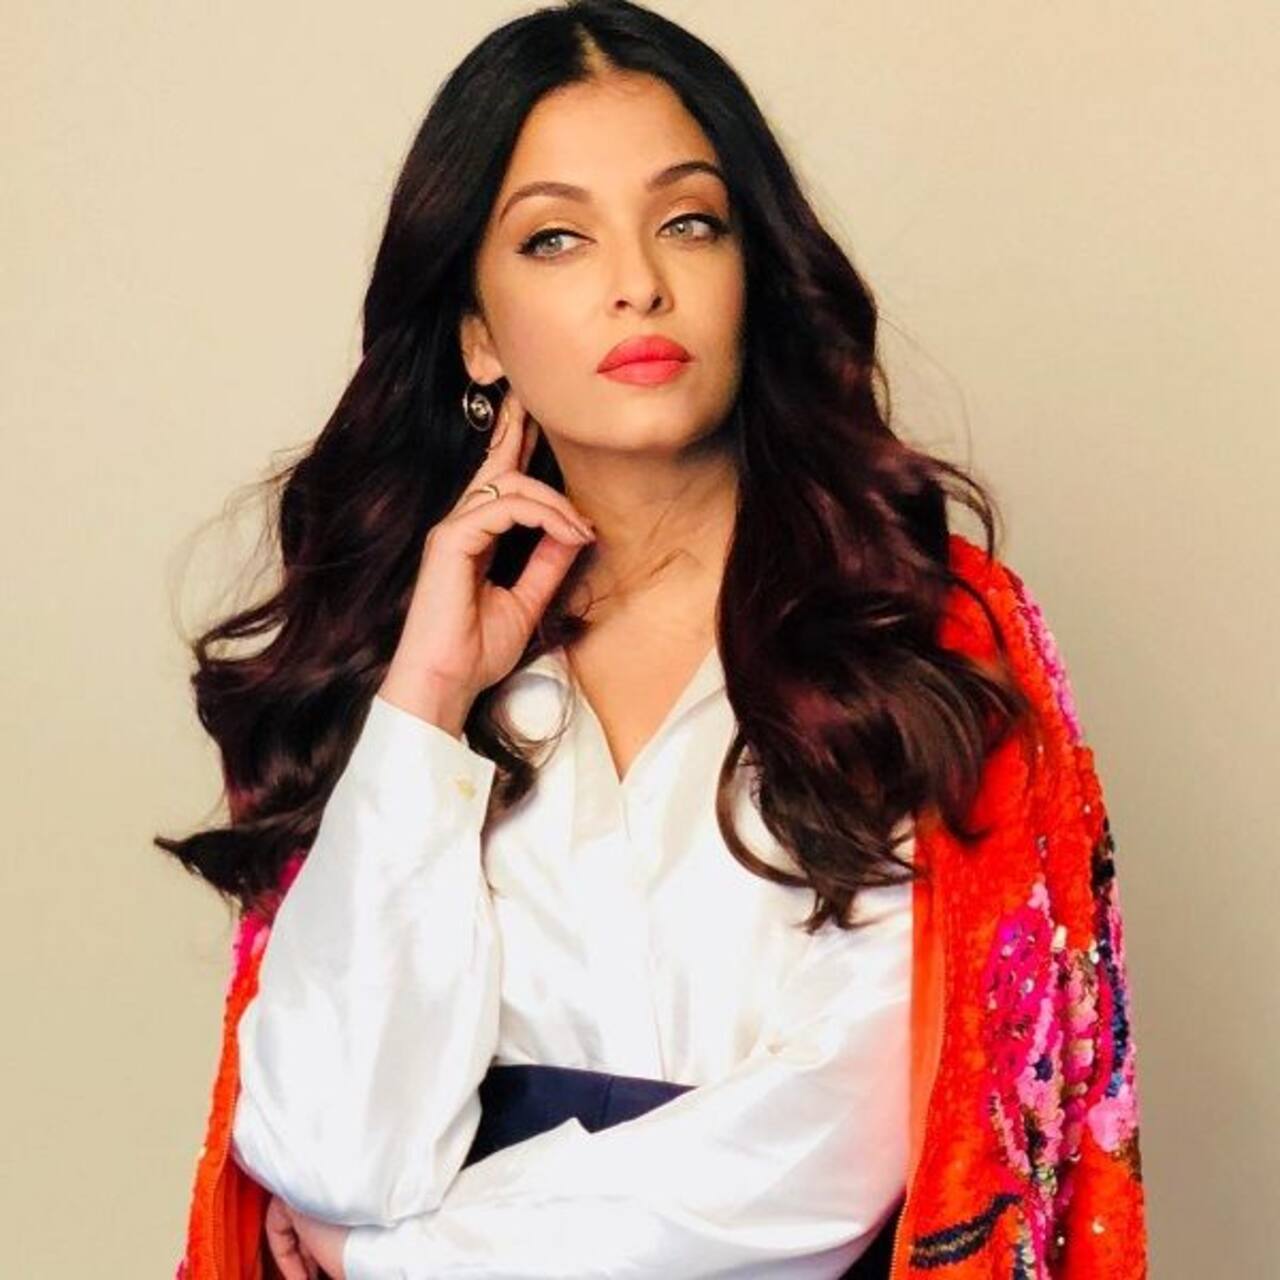 Cannes 2018: Here's a glimpse of Aishwarya Rai Bachchan getting ready to slay on day 2 - view pic